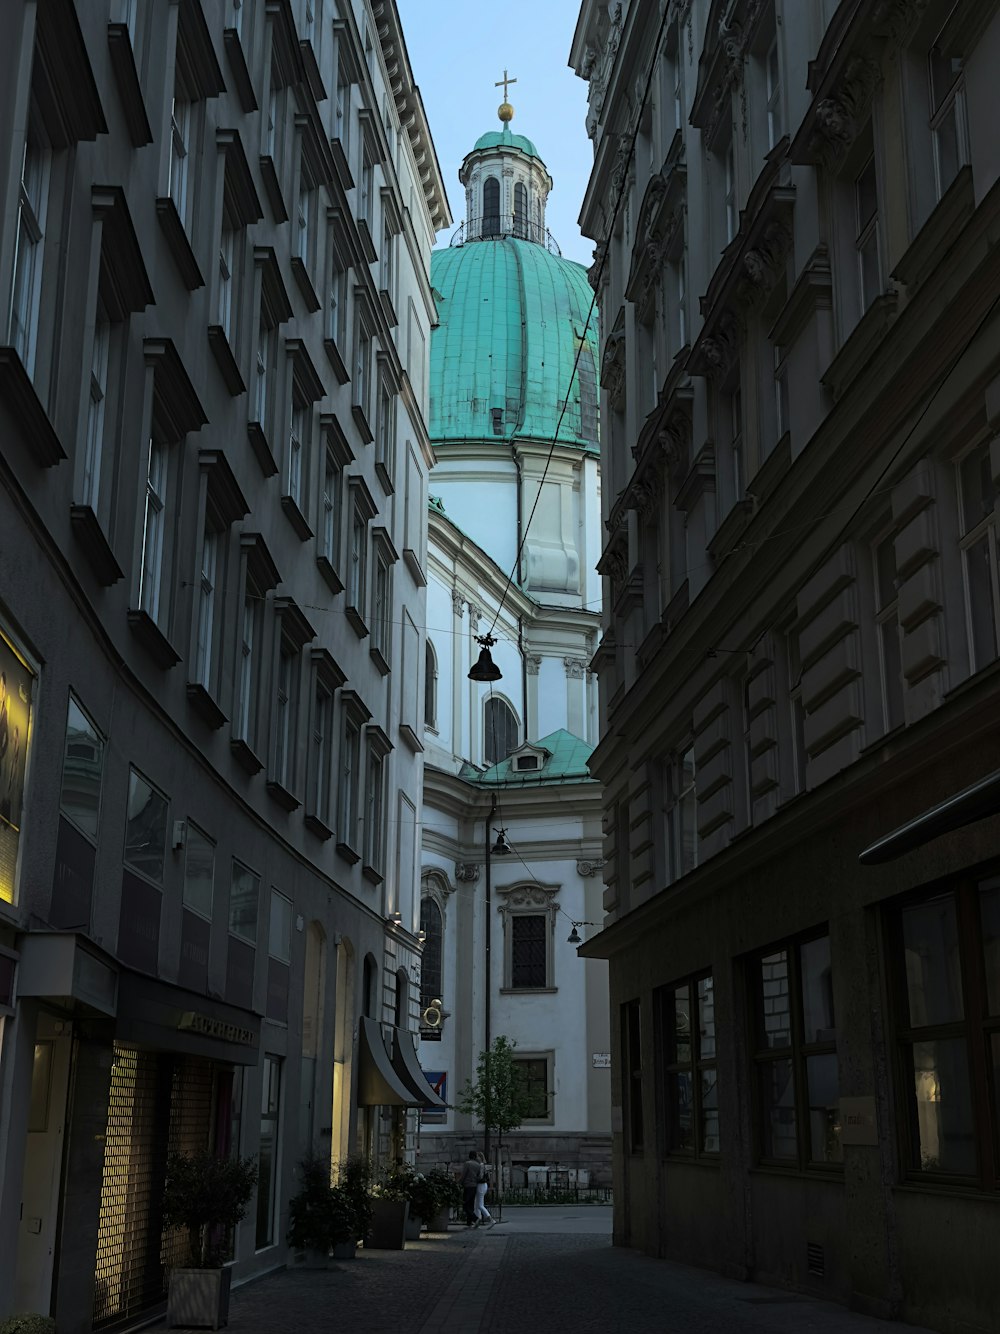 a view of a clock tower from a narrow alley way